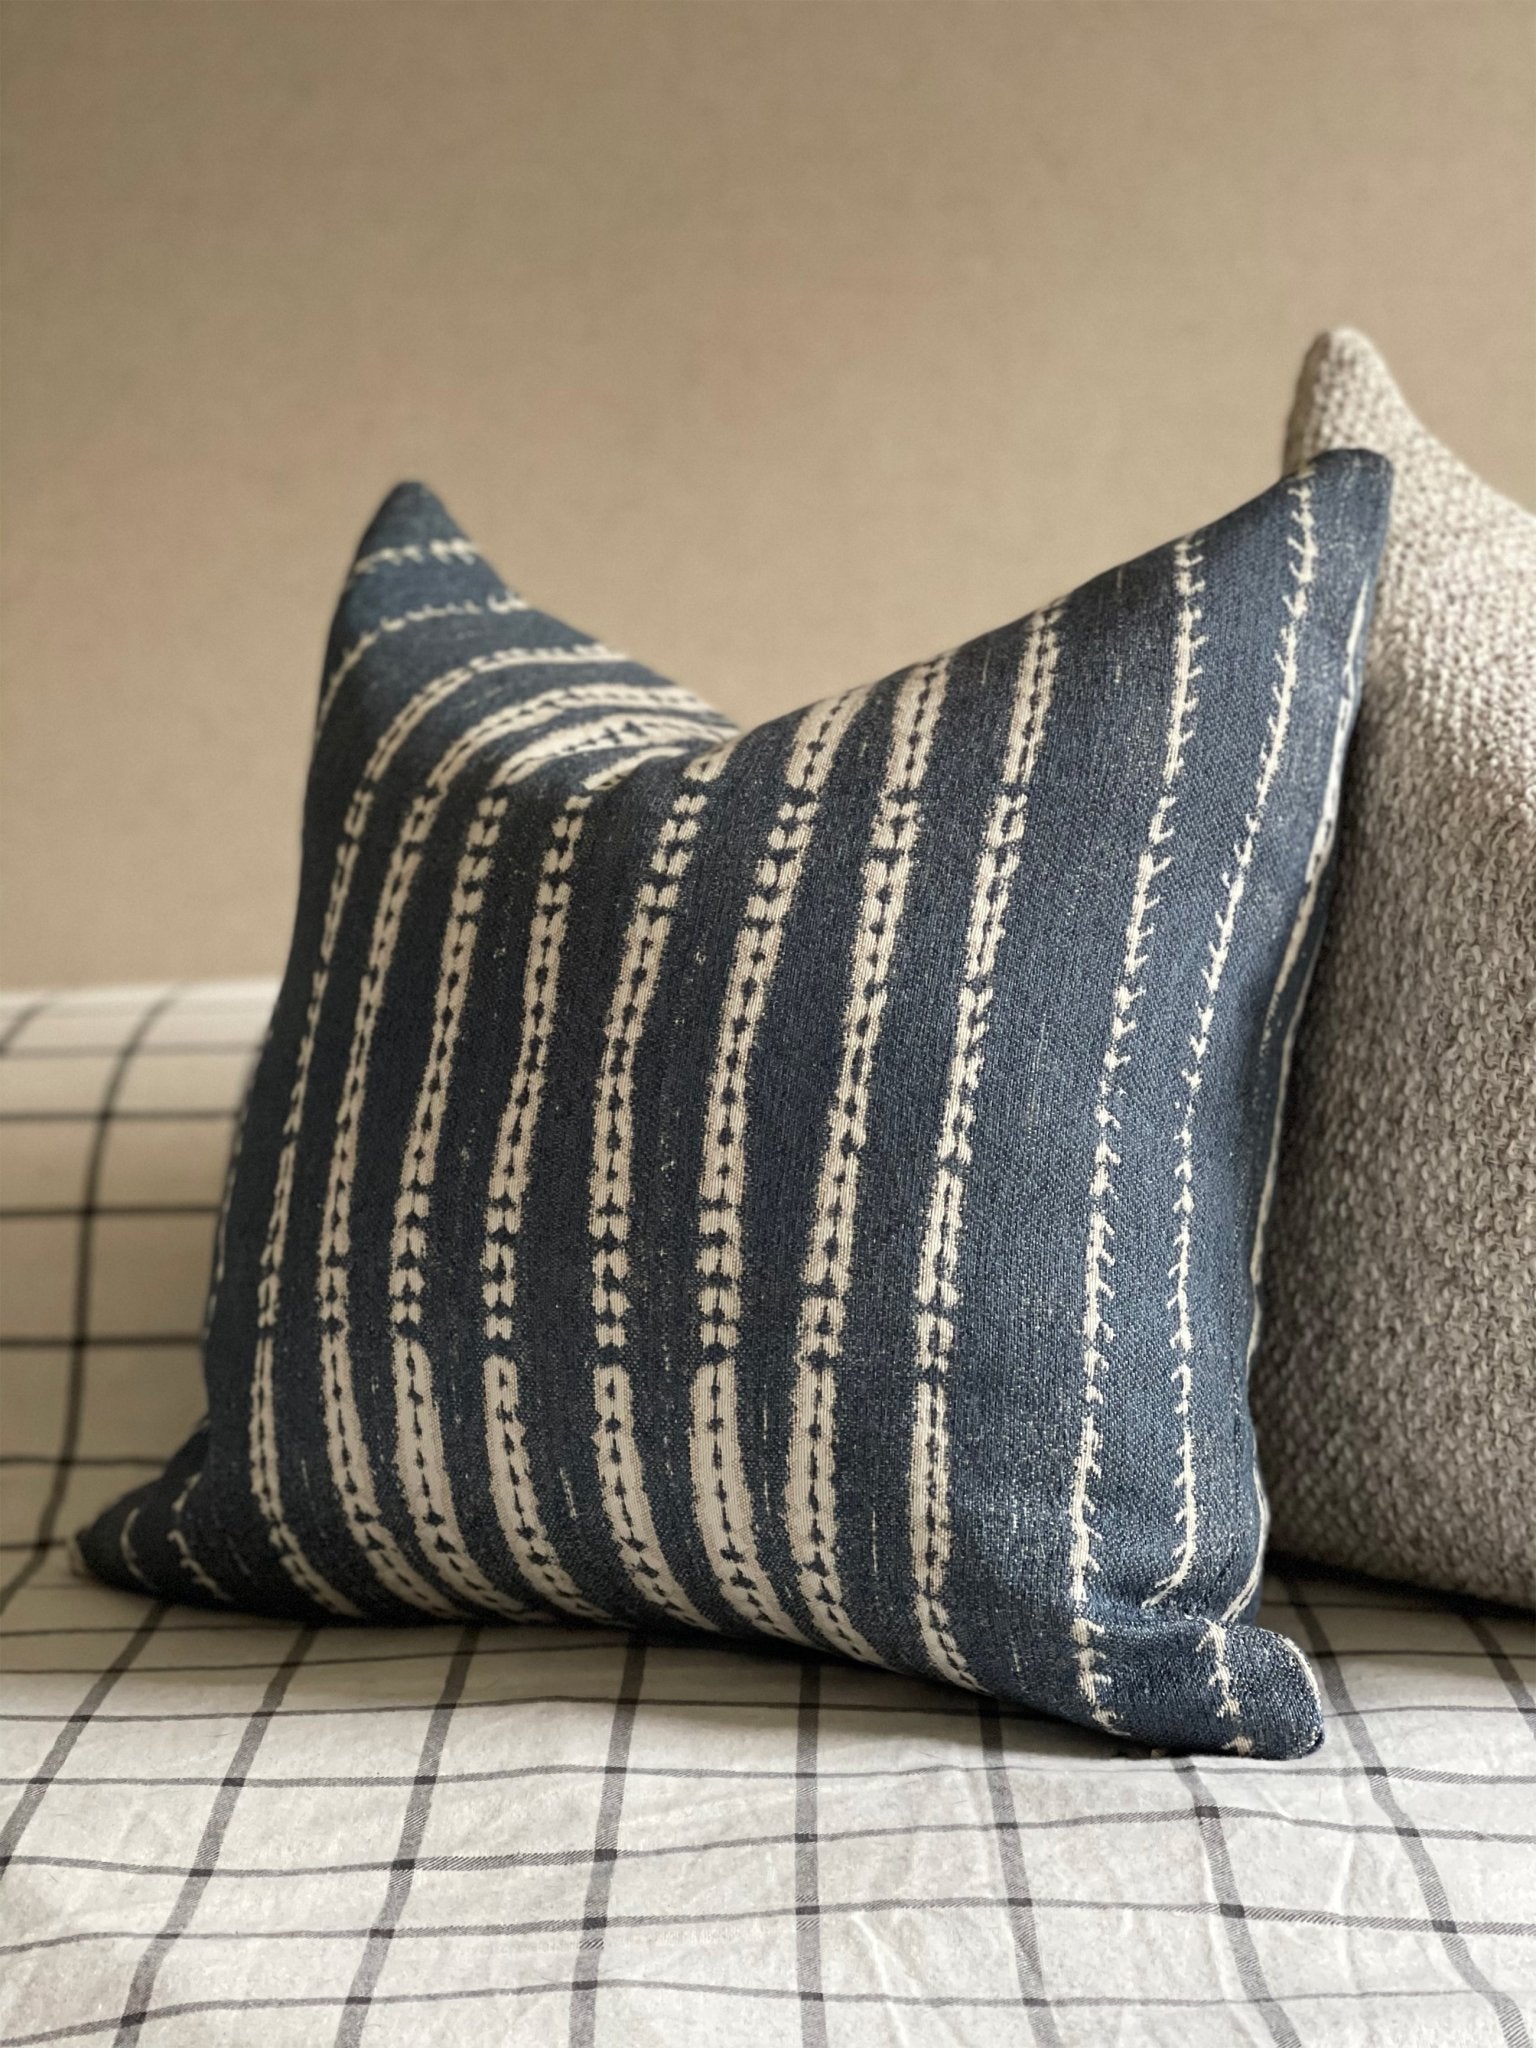 A side view of the blue and white striped decorative pillow showing its craftsmanship at Cielle Home